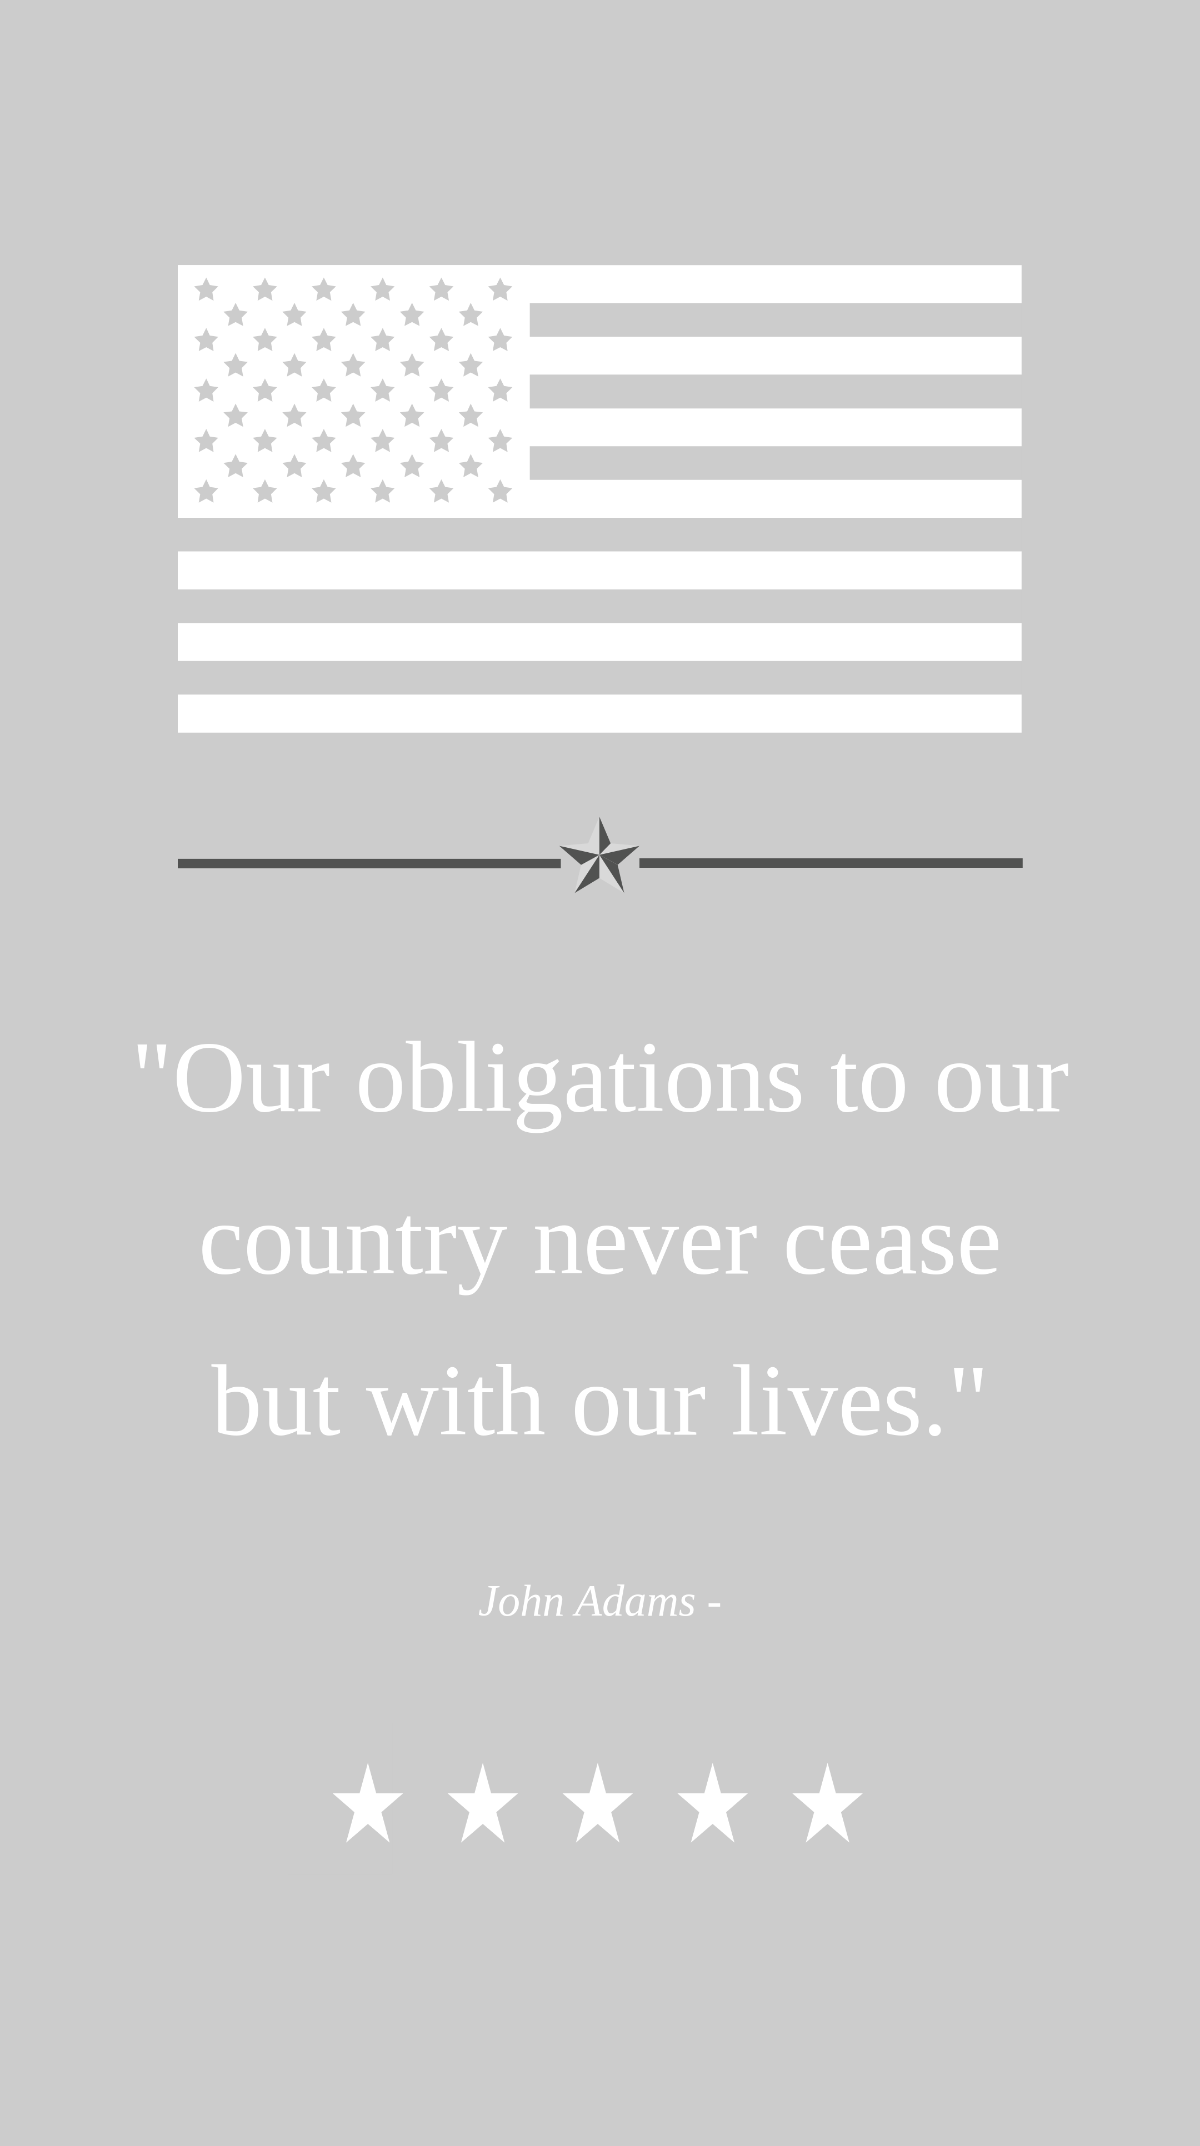 John Adams - Our obligations to our country never cease but with our lives. Template